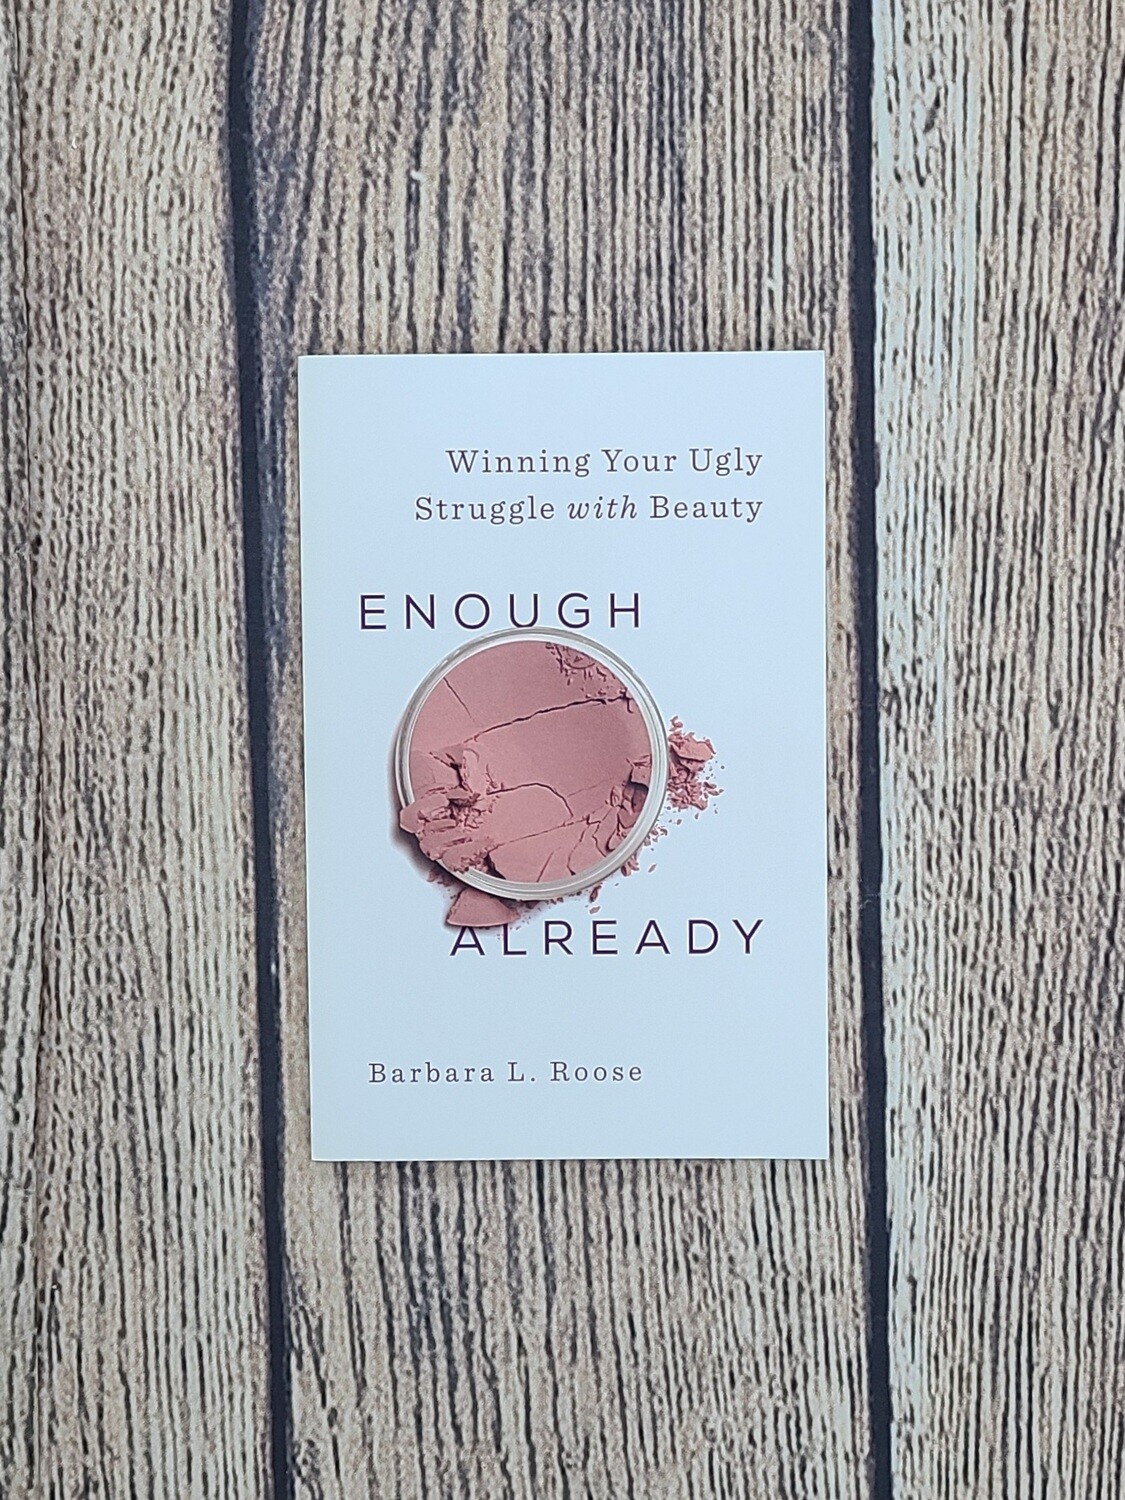 Enough Already: Winning Your Ugly Struggle with Beauty by Barbara L. Roose